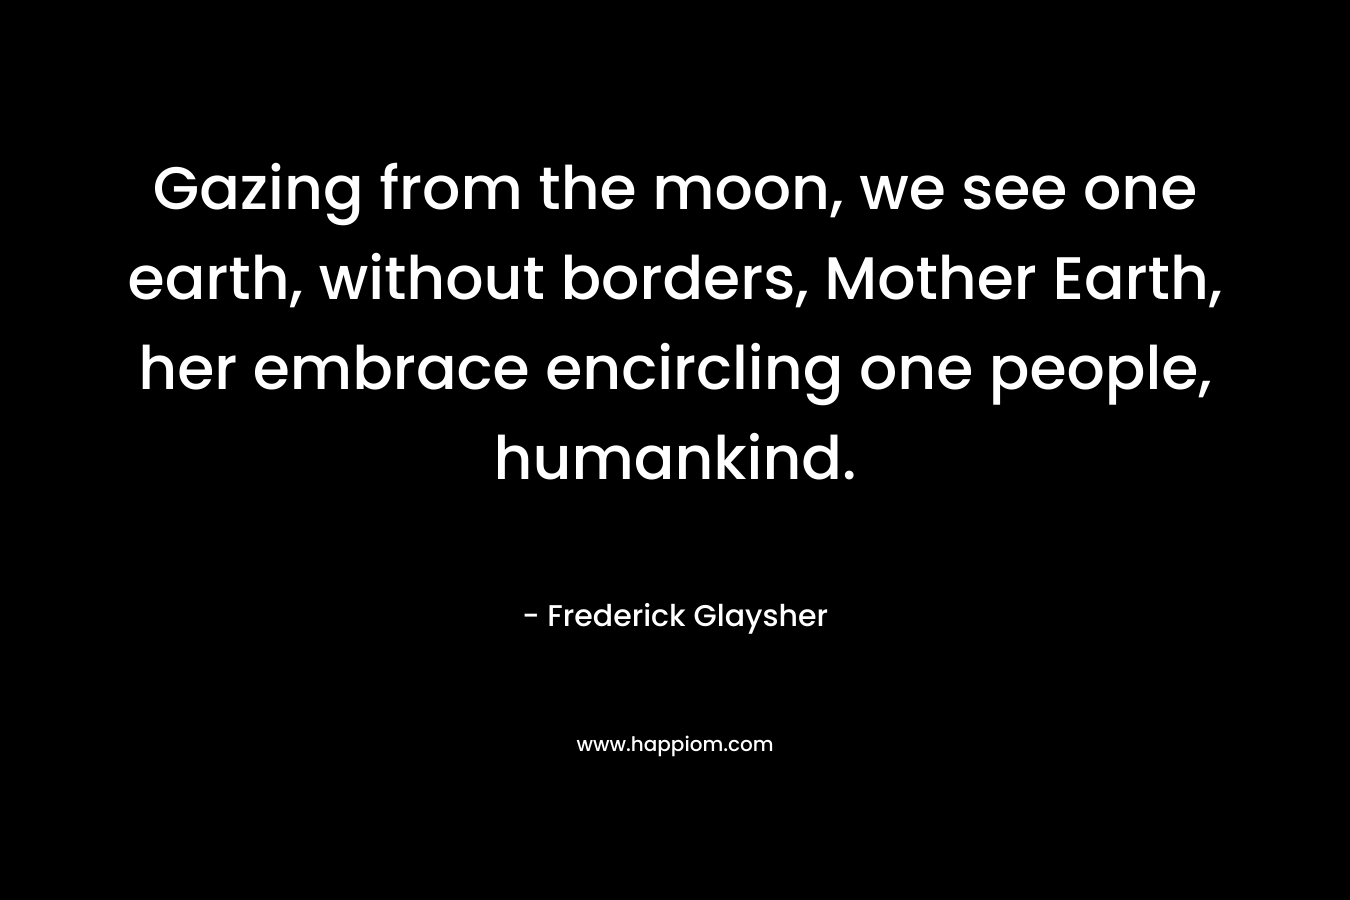 Gazing from the moon, we see one earth, without borders, Mother Earth, her embrace encircling one people, humankind. – Frederick Glaysher